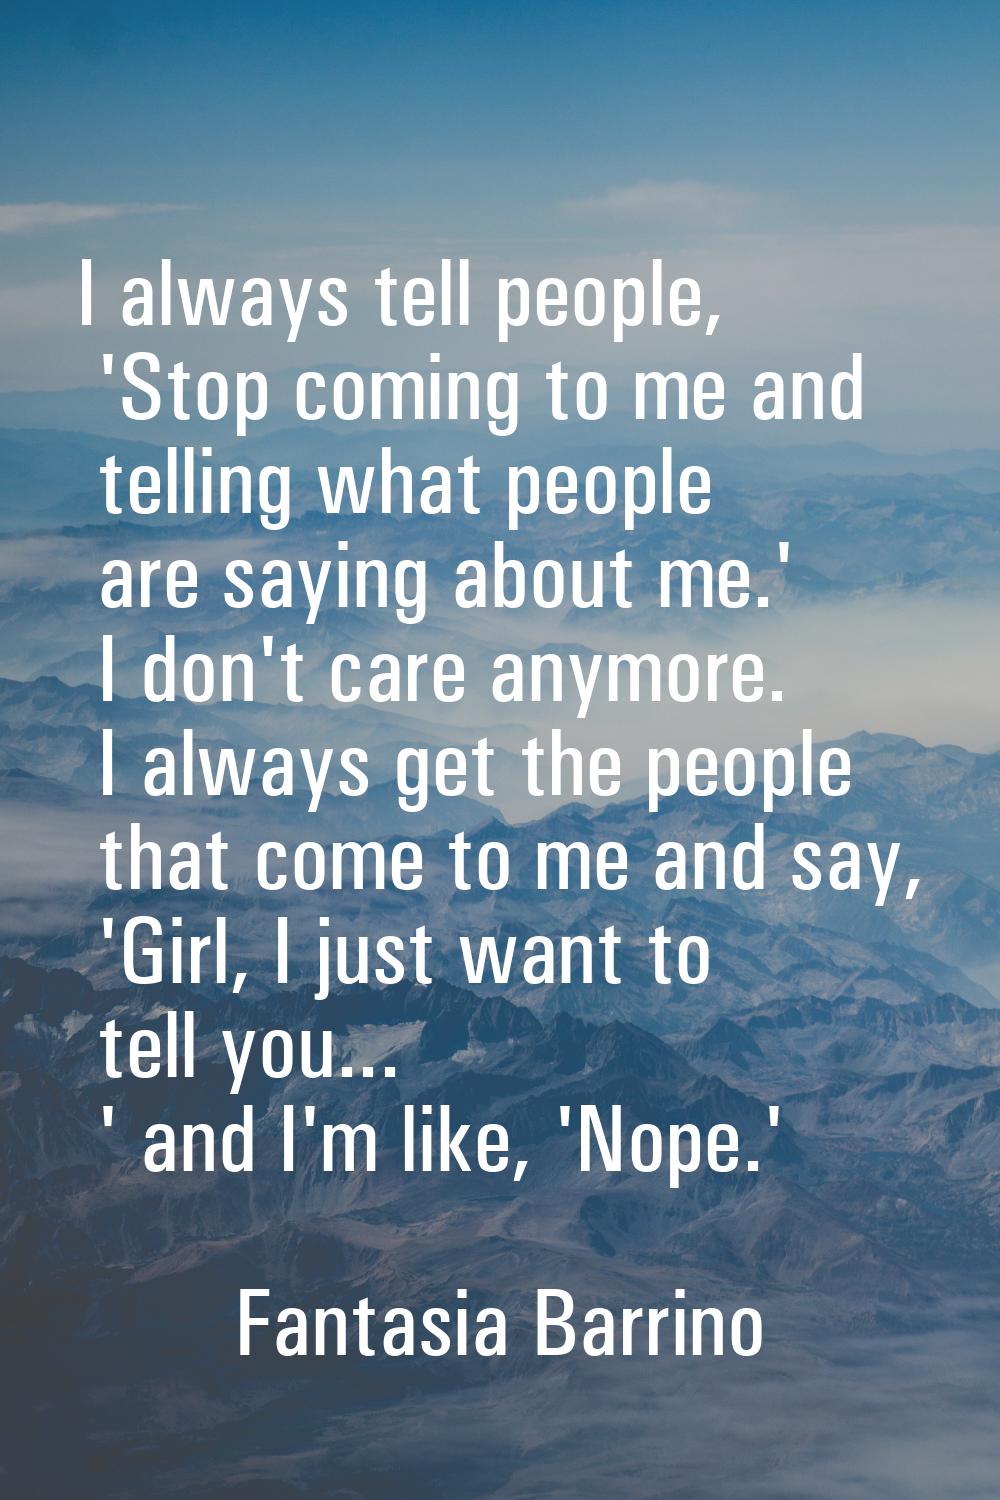 I always tell people, 'Stop coming to me and telling what people are saying about me.' I don't care